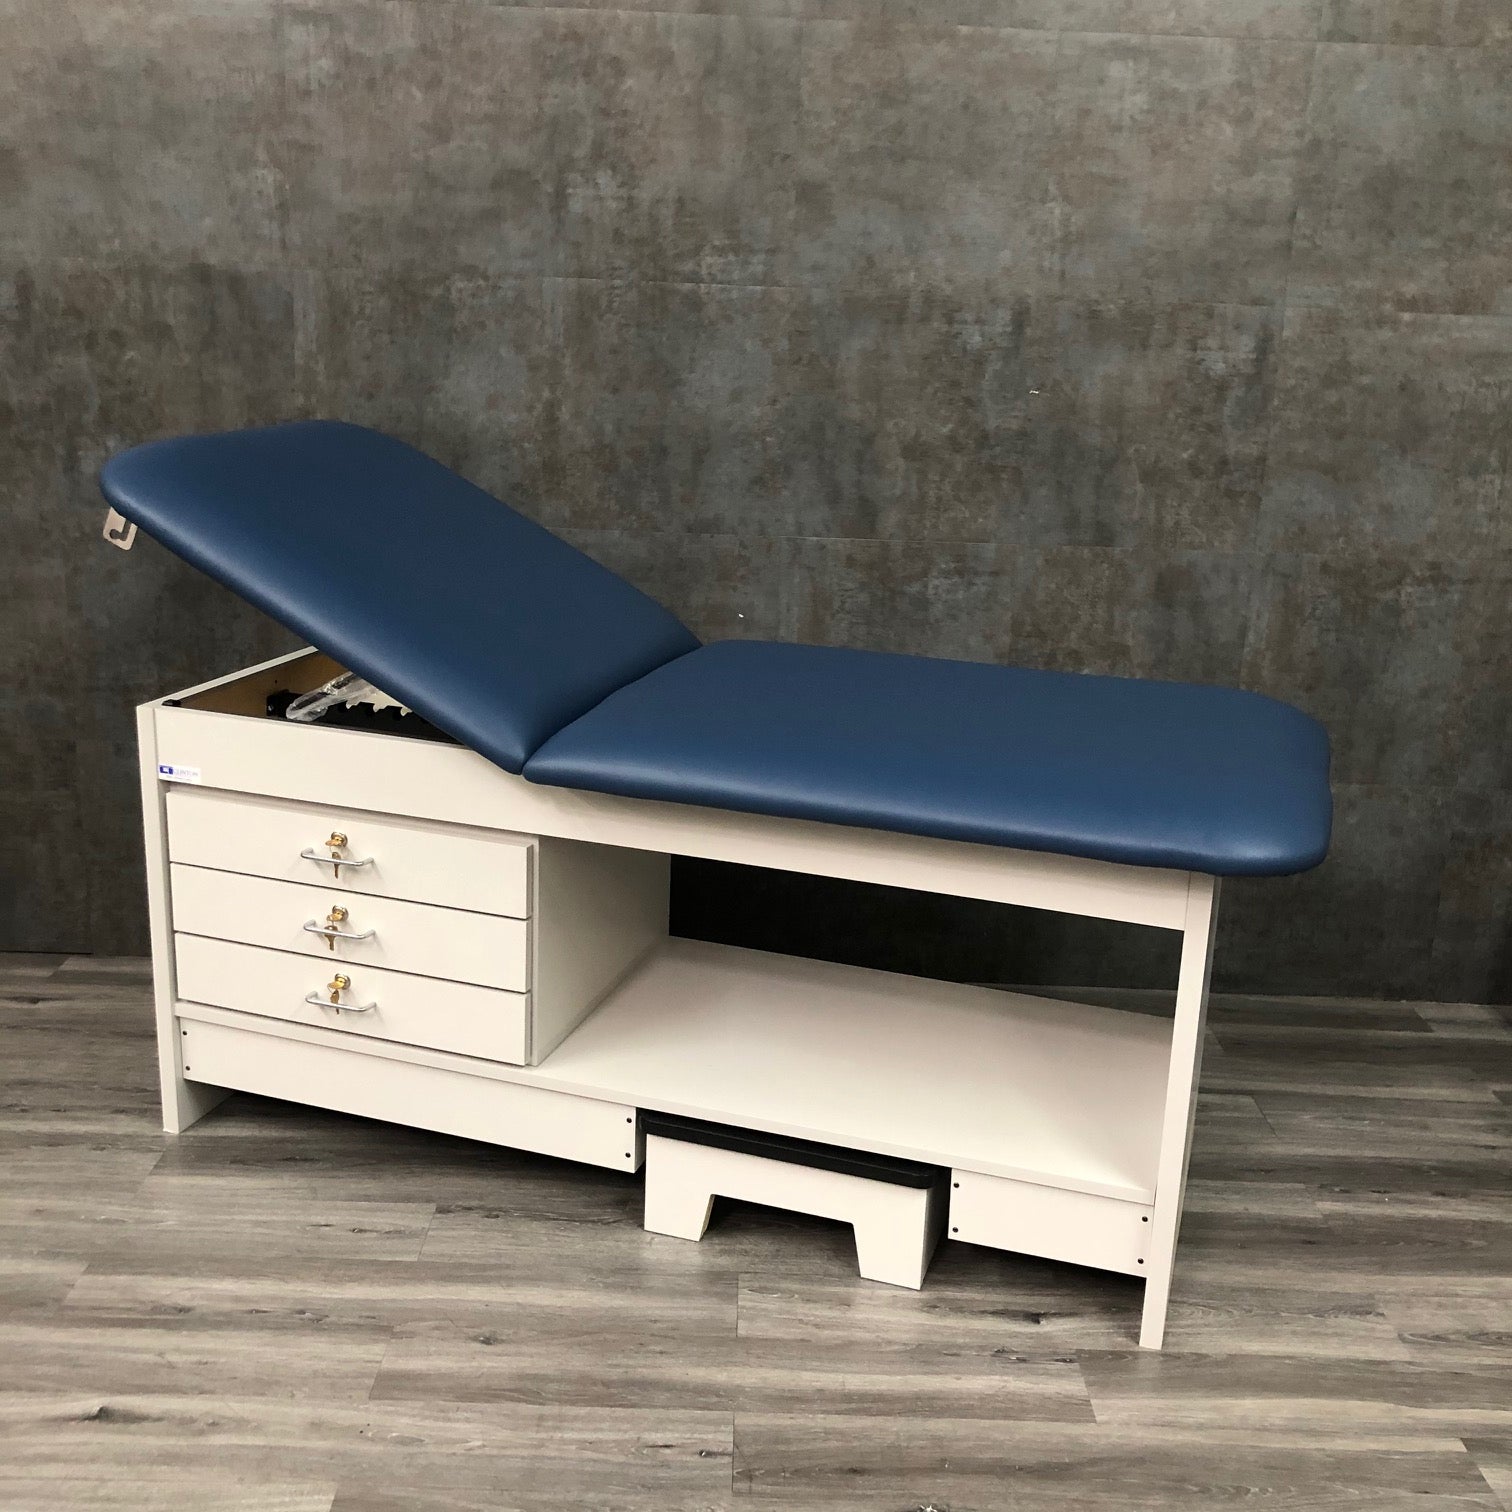 Clinton Exam Treatment Table with Drawers